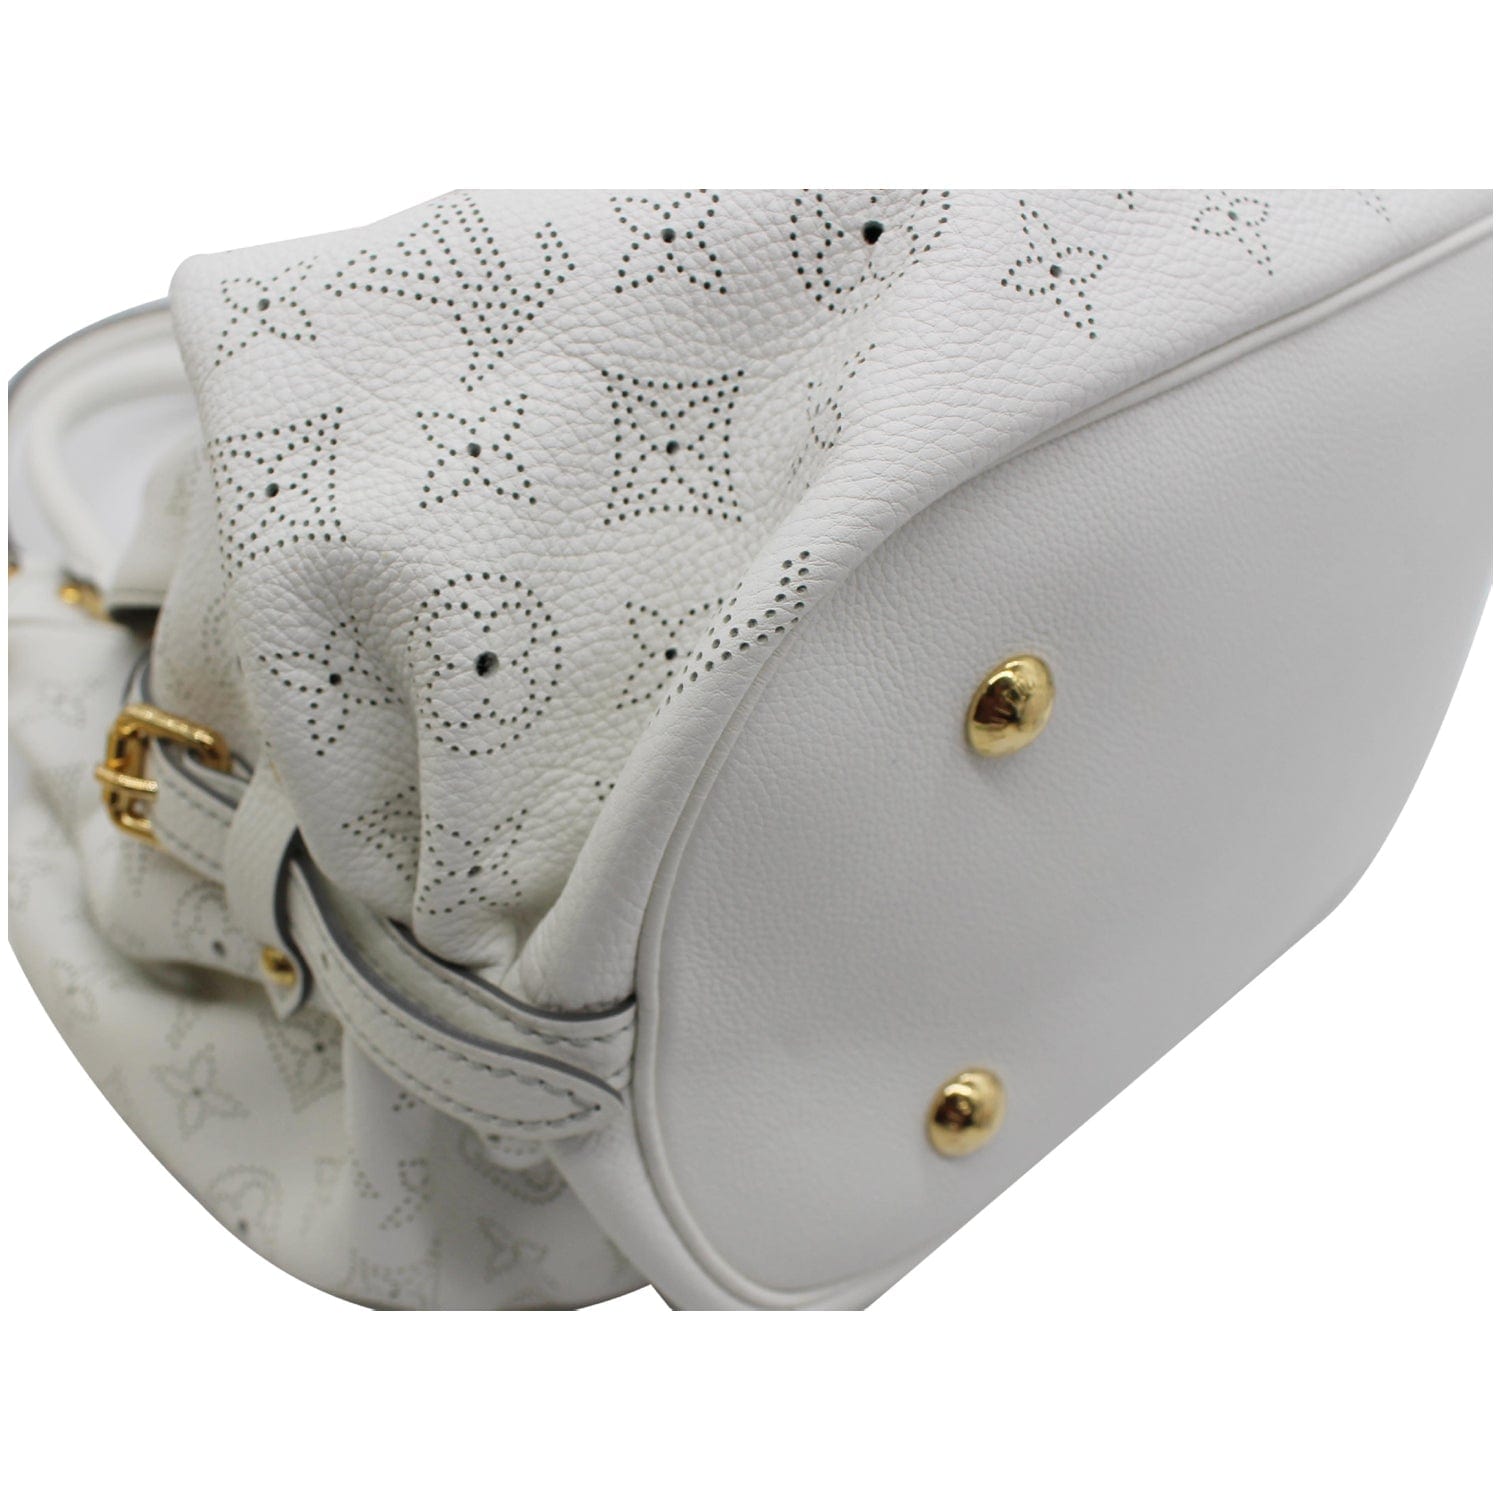 Leather bag Louis Vuitton X NBA White in Leather - 23923654